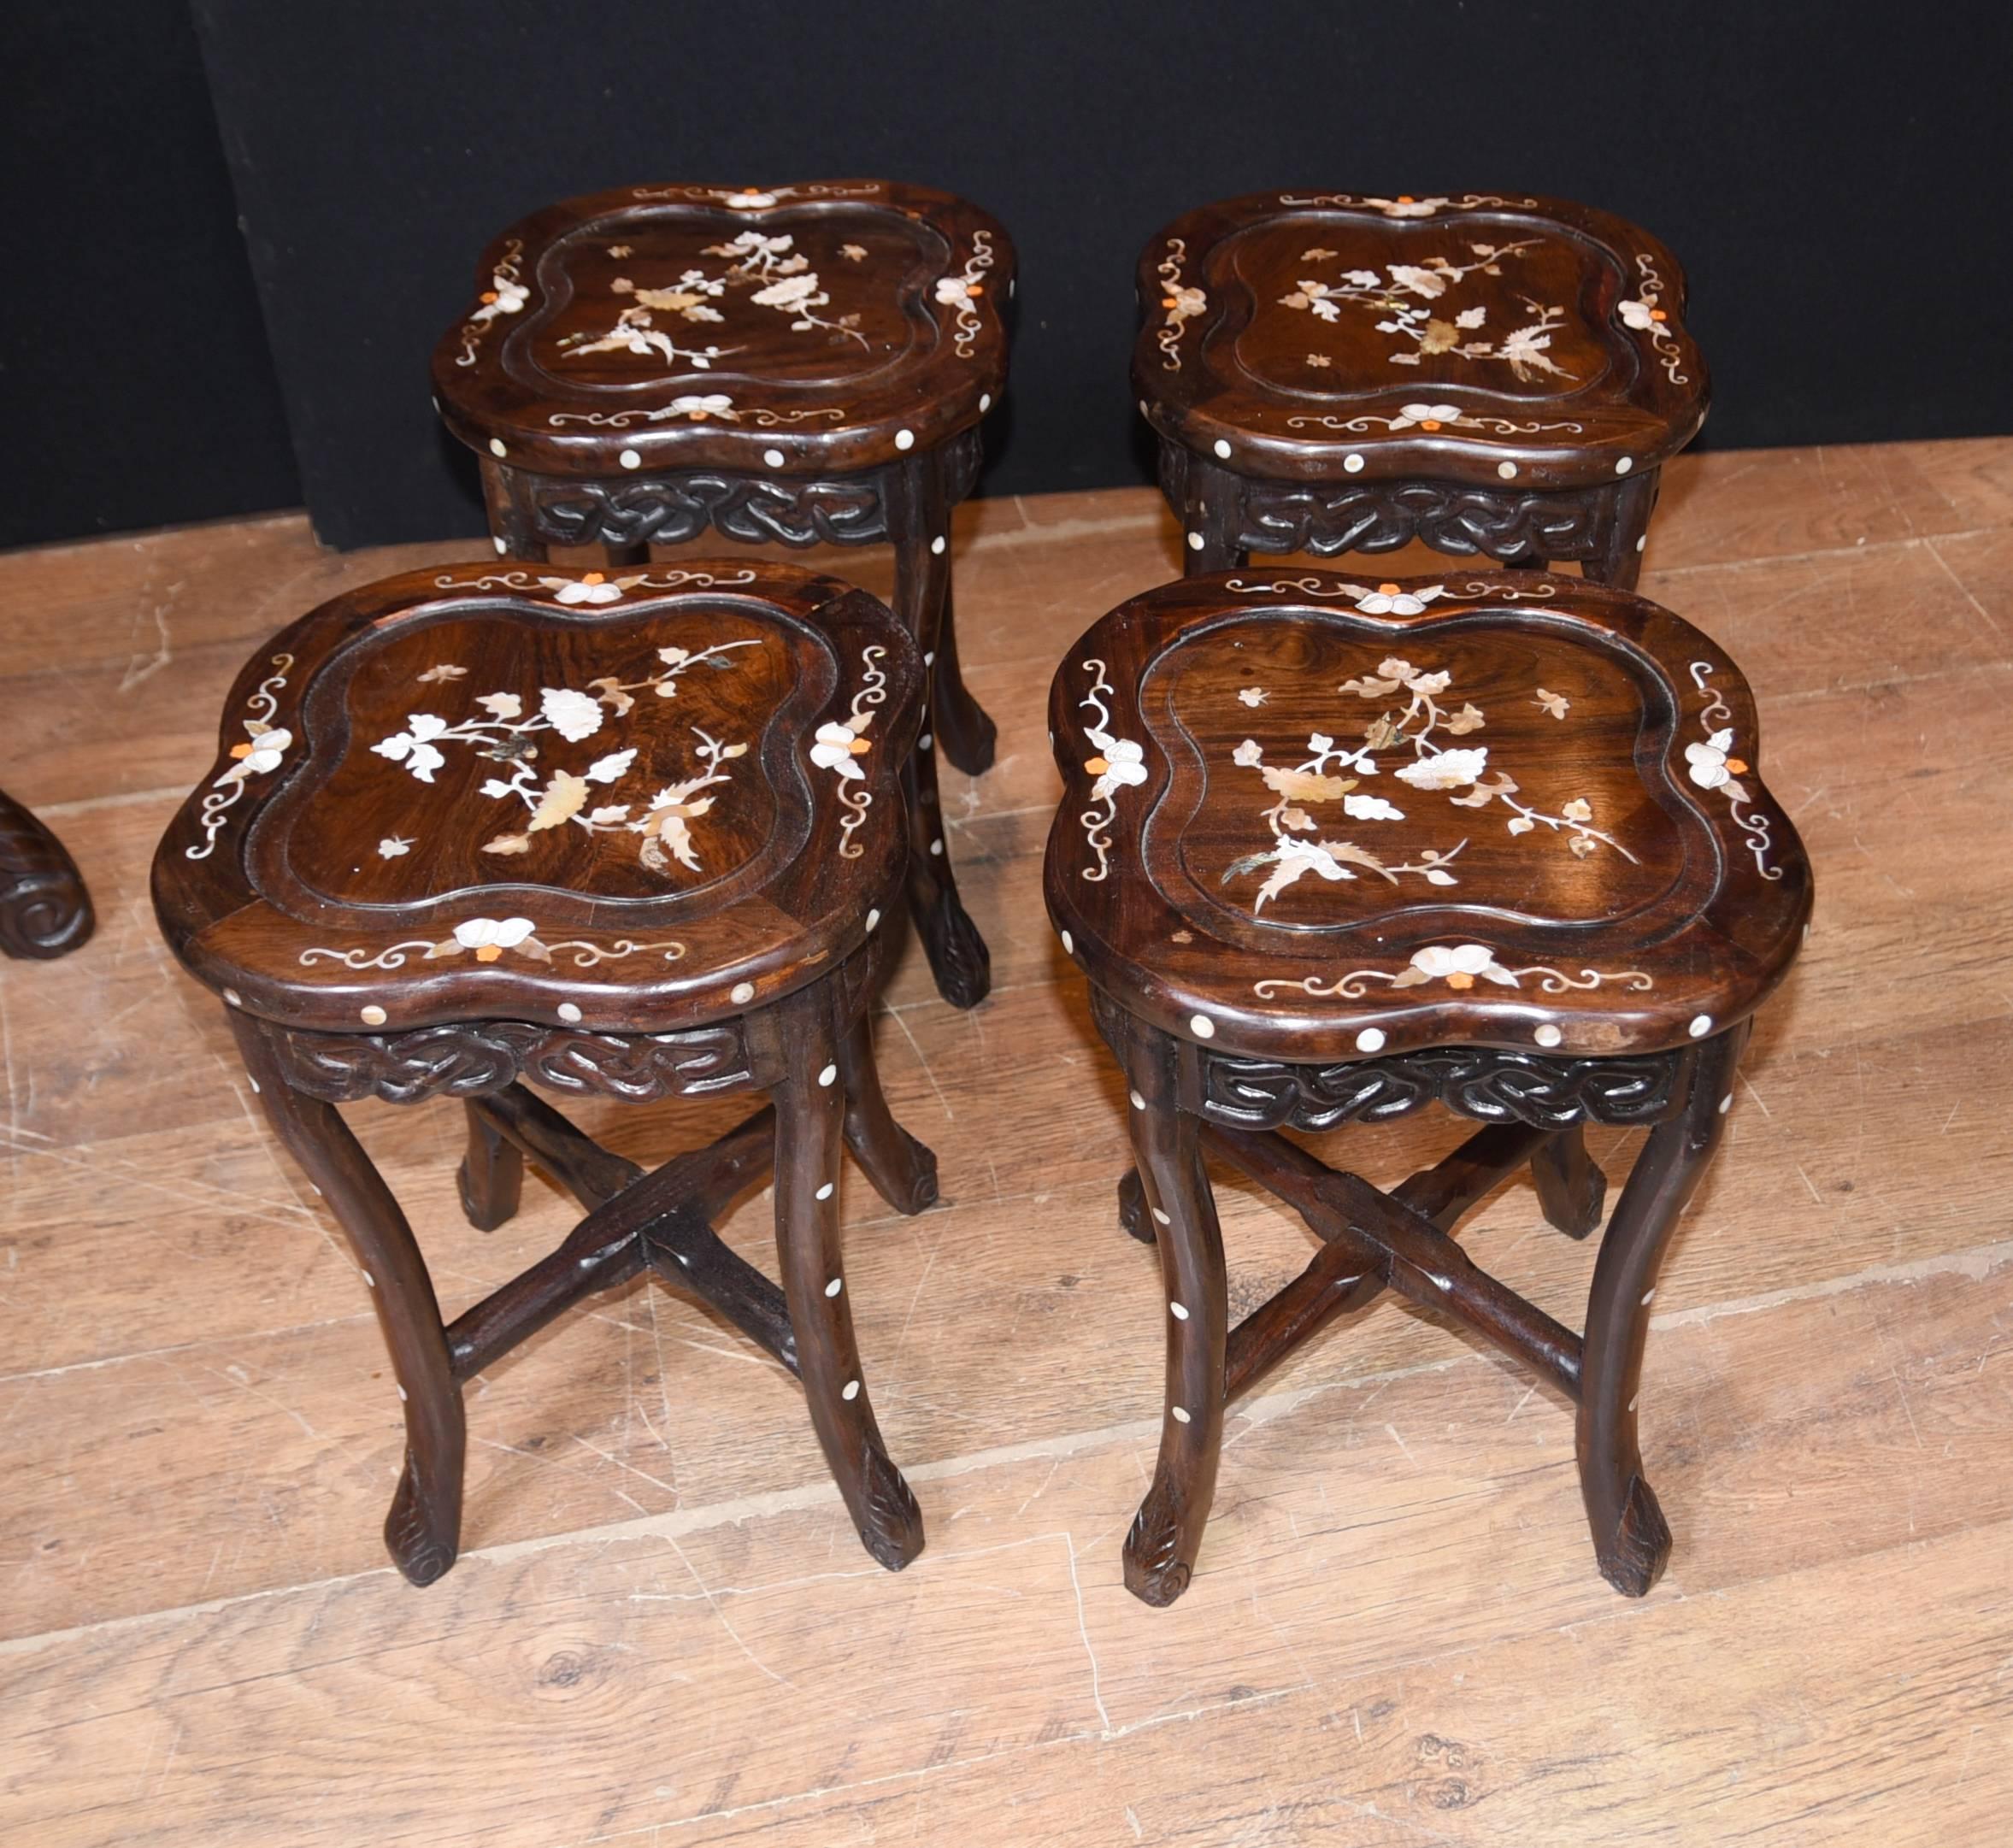 Antique Chinese Table Stool Dining Set Mother-of-Pearl Inlay Hardwood For Sale 3